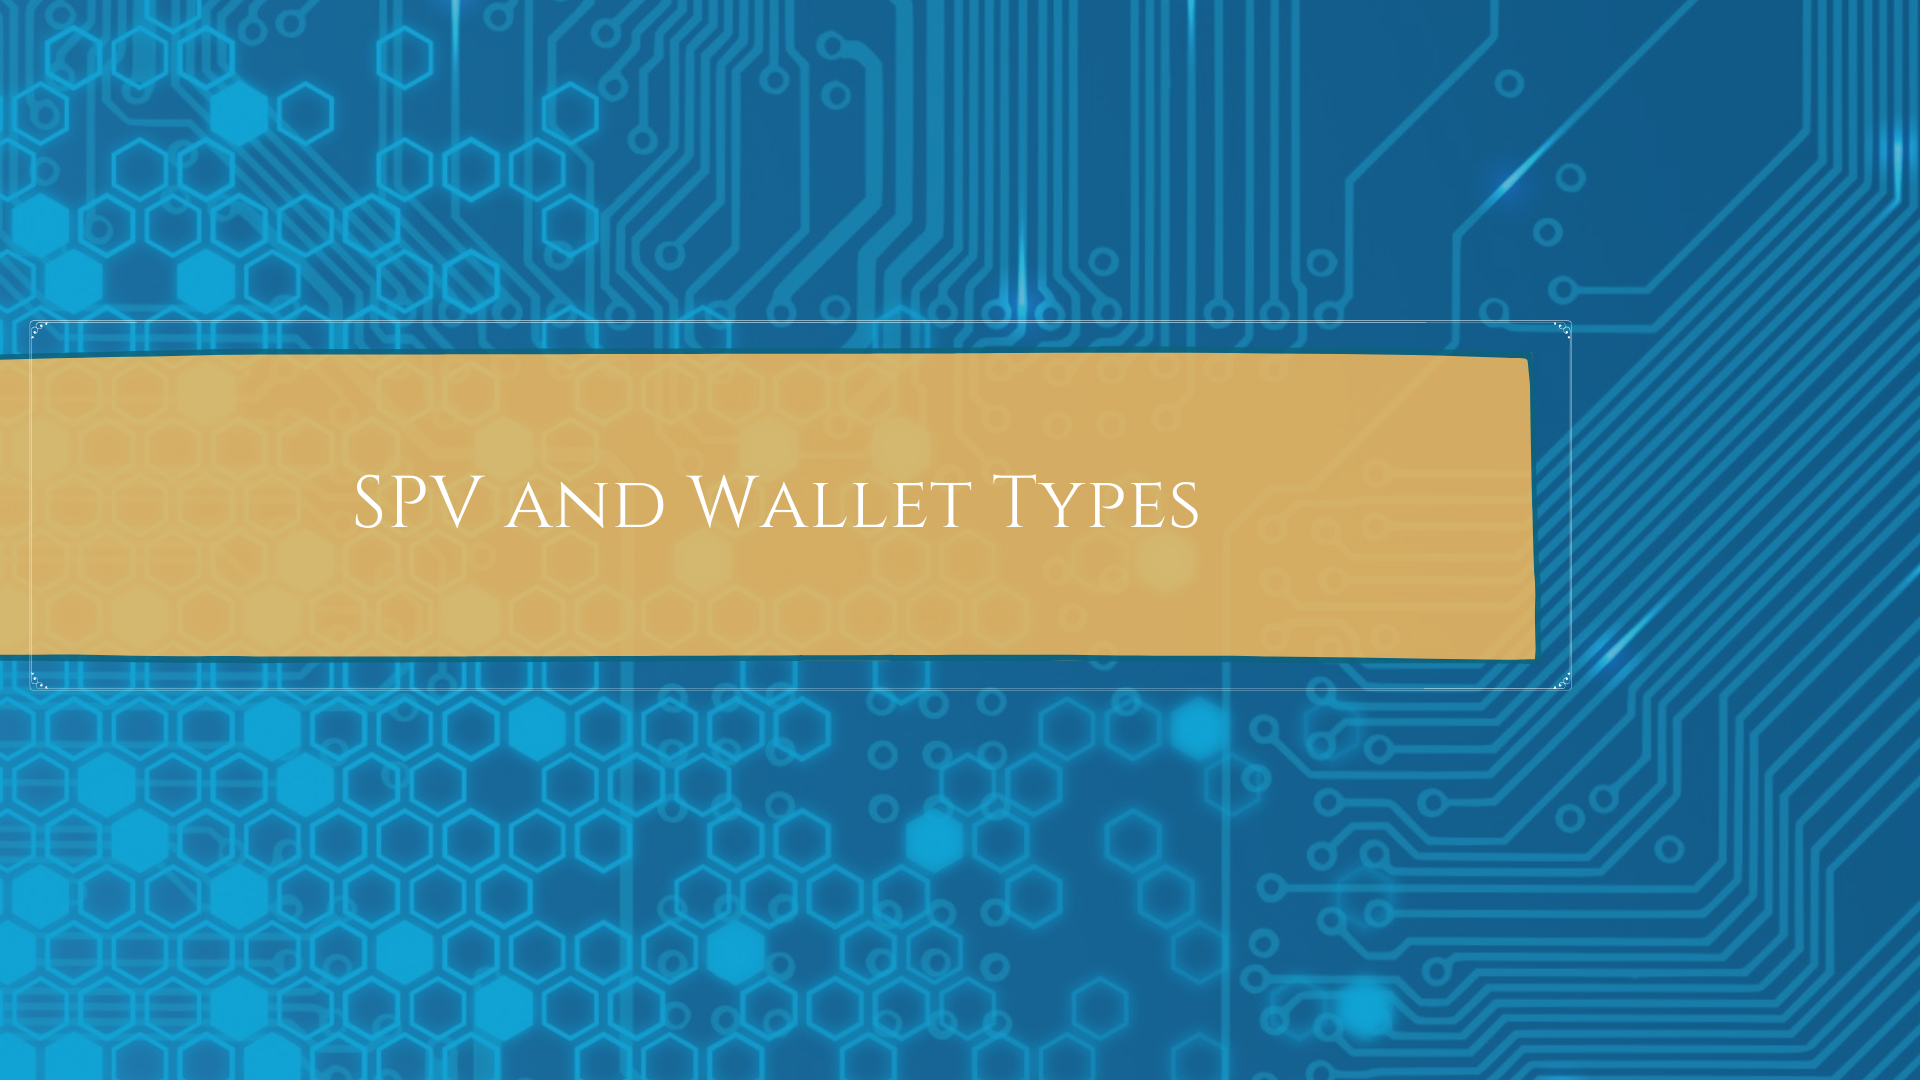 SPV and Wallet Types